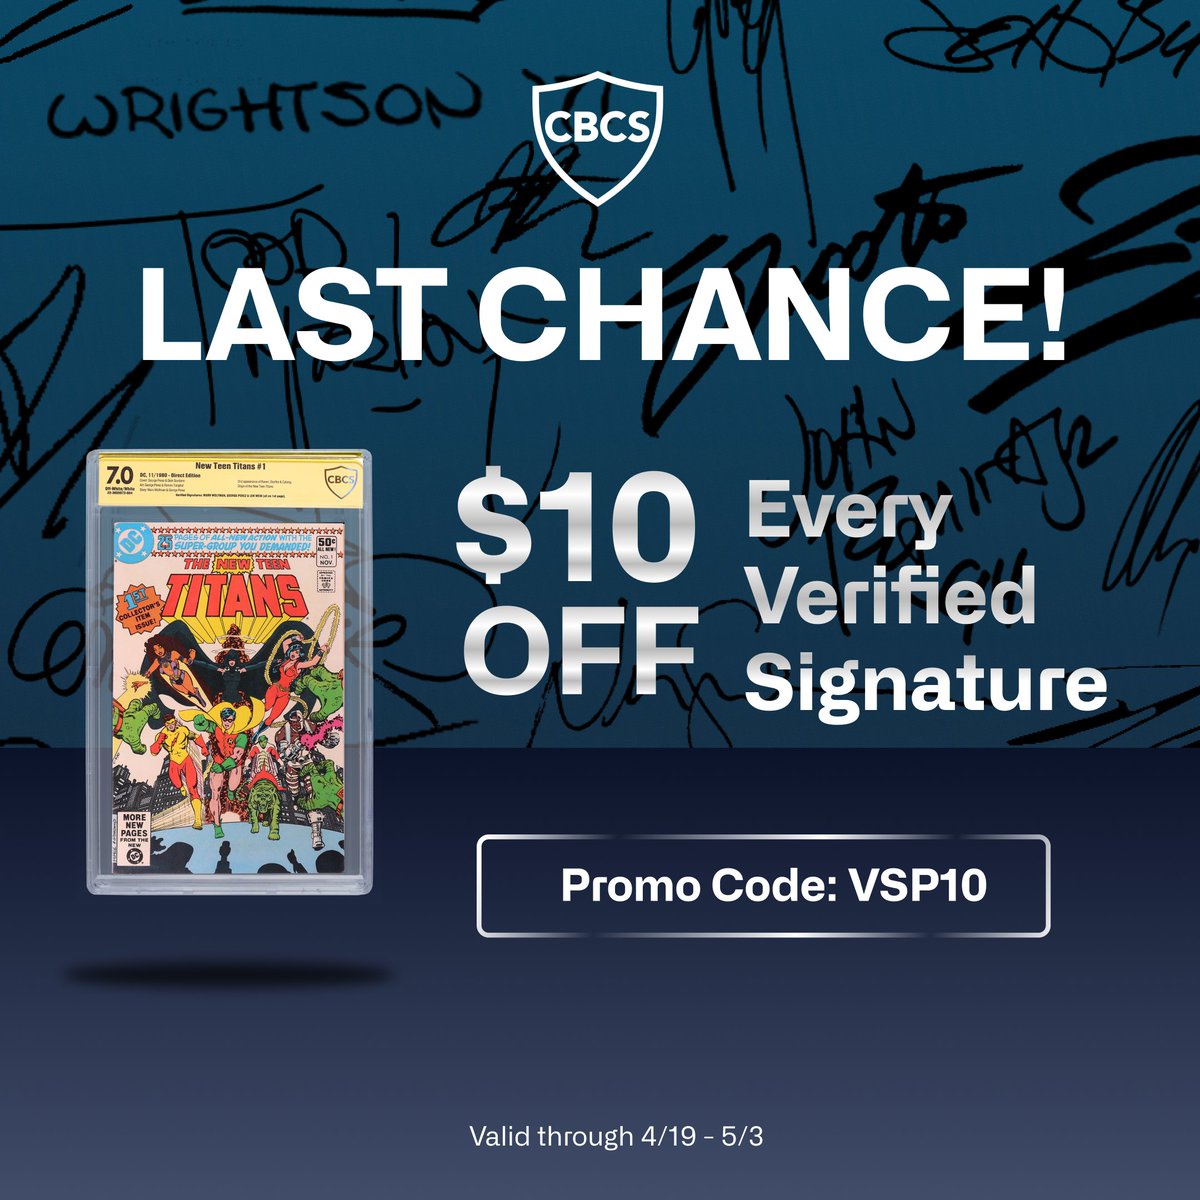 There are only a few hours left! Don't miss your chance on this incredible deal!

cbcscomics.com/submission-form

#cbcscomics #autograph #verifiedsignature #comicbooks #comiccollecting #collector #comiccollector #signature